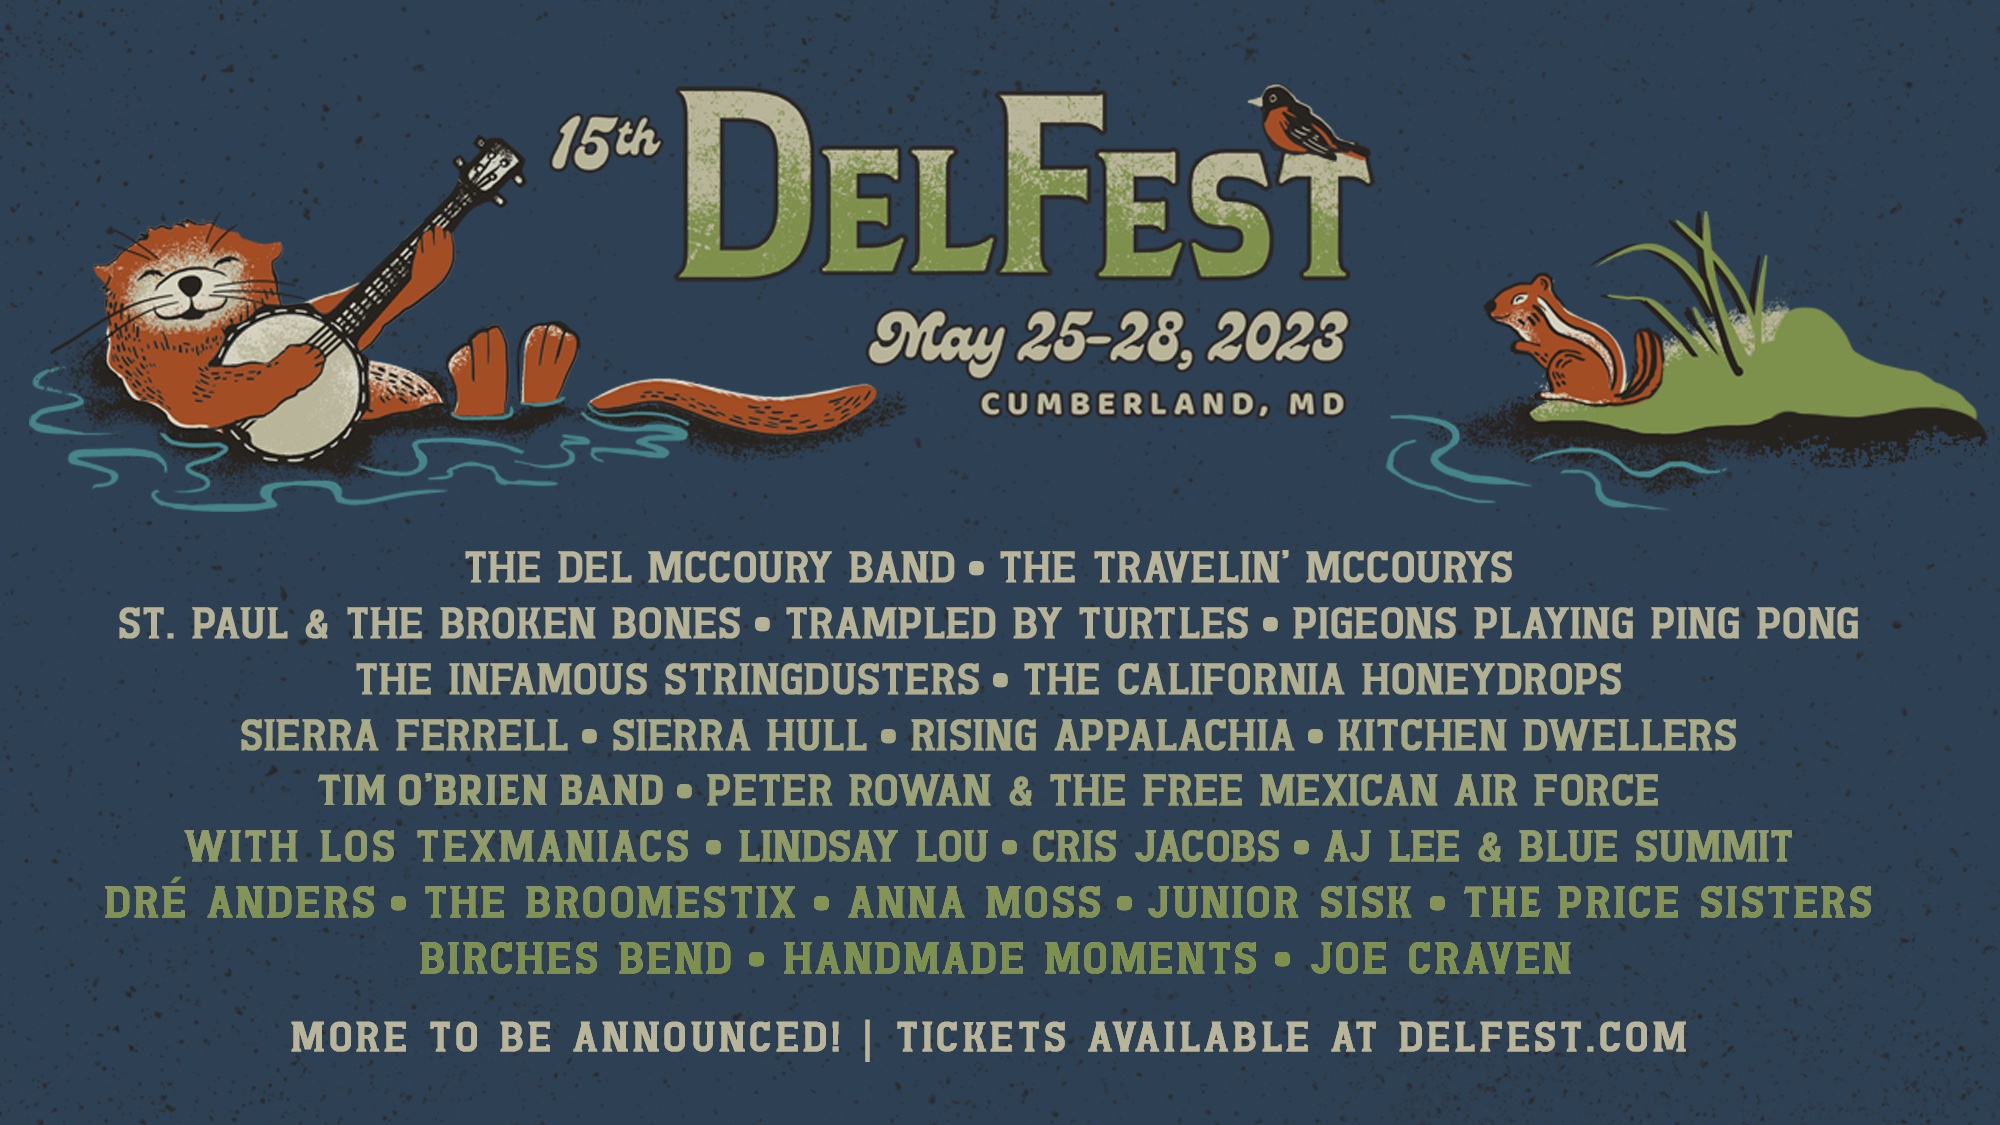 Preview DelFest 2023 Features Some of the Brightest Stars in Bluegrass